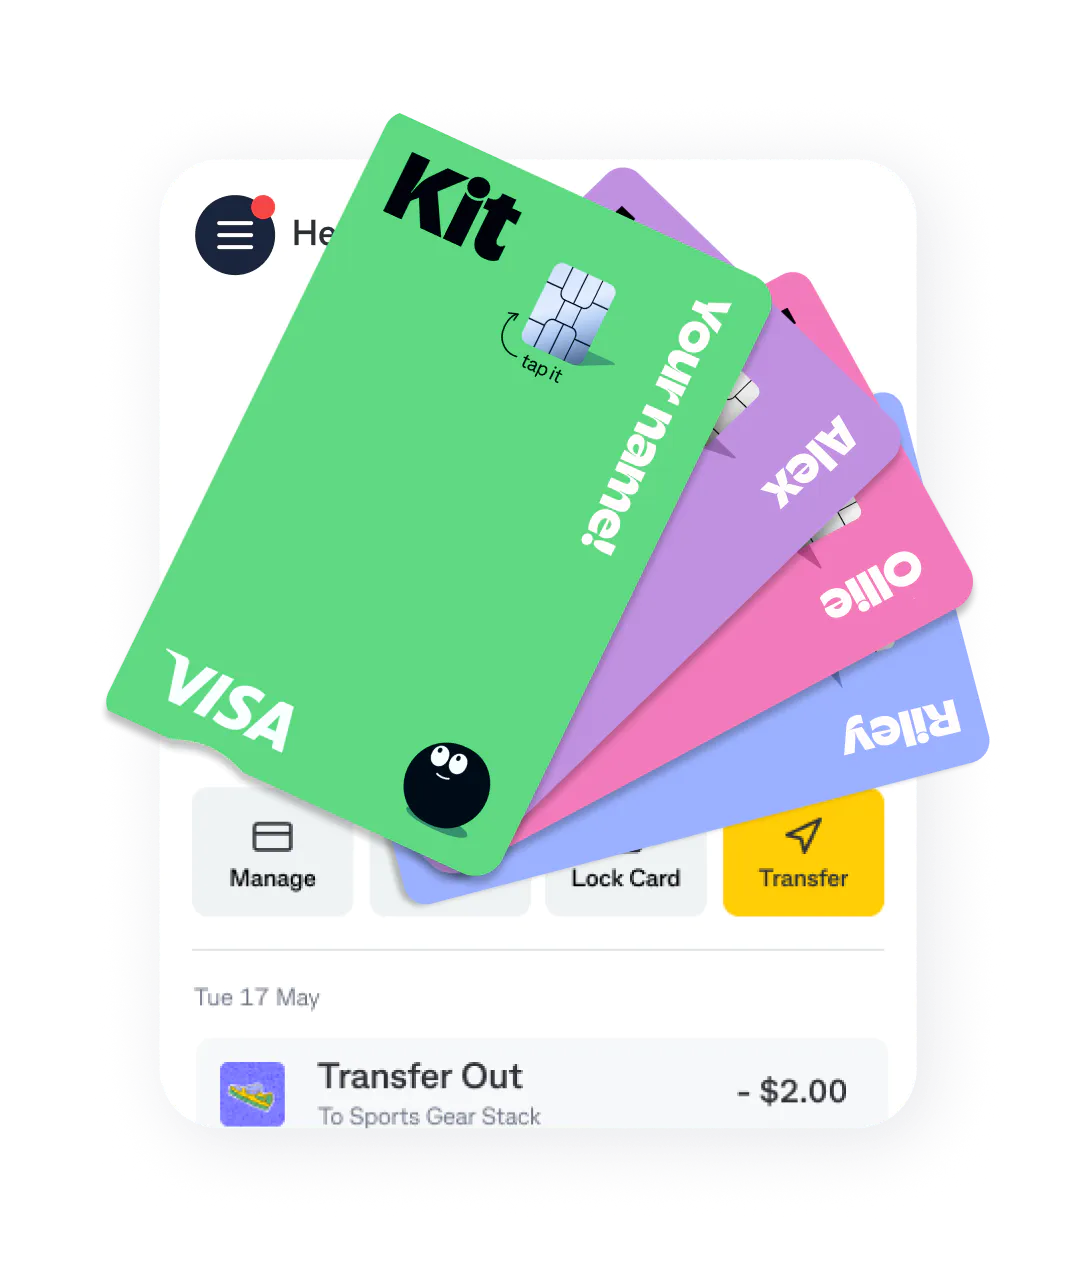 Kit cards and Kit App 